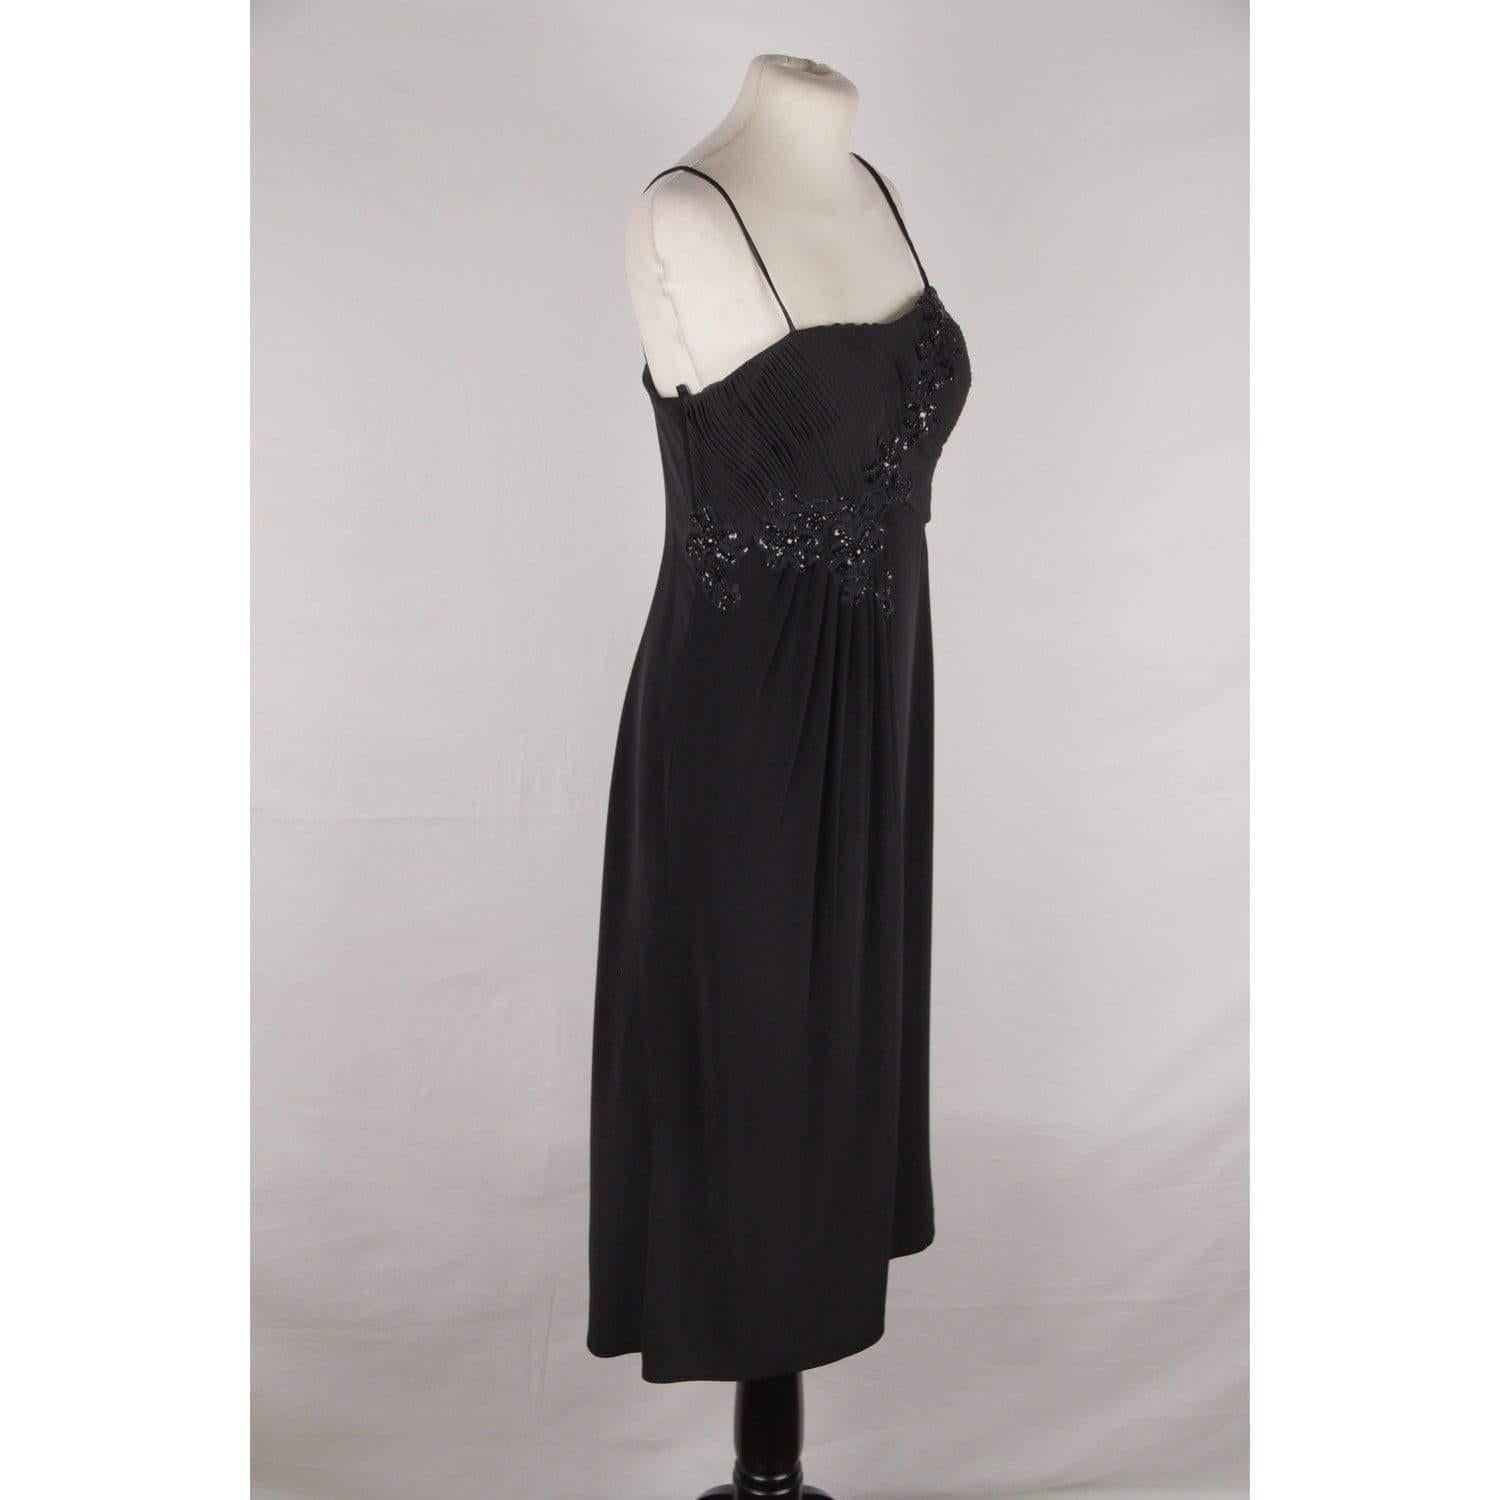 MATERIAL: Triacetate COLOR: Black MODEL: Cocktail dress GENDER: Women SIZE: Medium CONDITION RATING: B :GOOD CONDITION - Some light wear of use CONDITION DETAILS: Gently used MEASUREMENTS: SHOULDER TO SHOULDER: - BUST: 16 inches - 40,6 cm (flat -